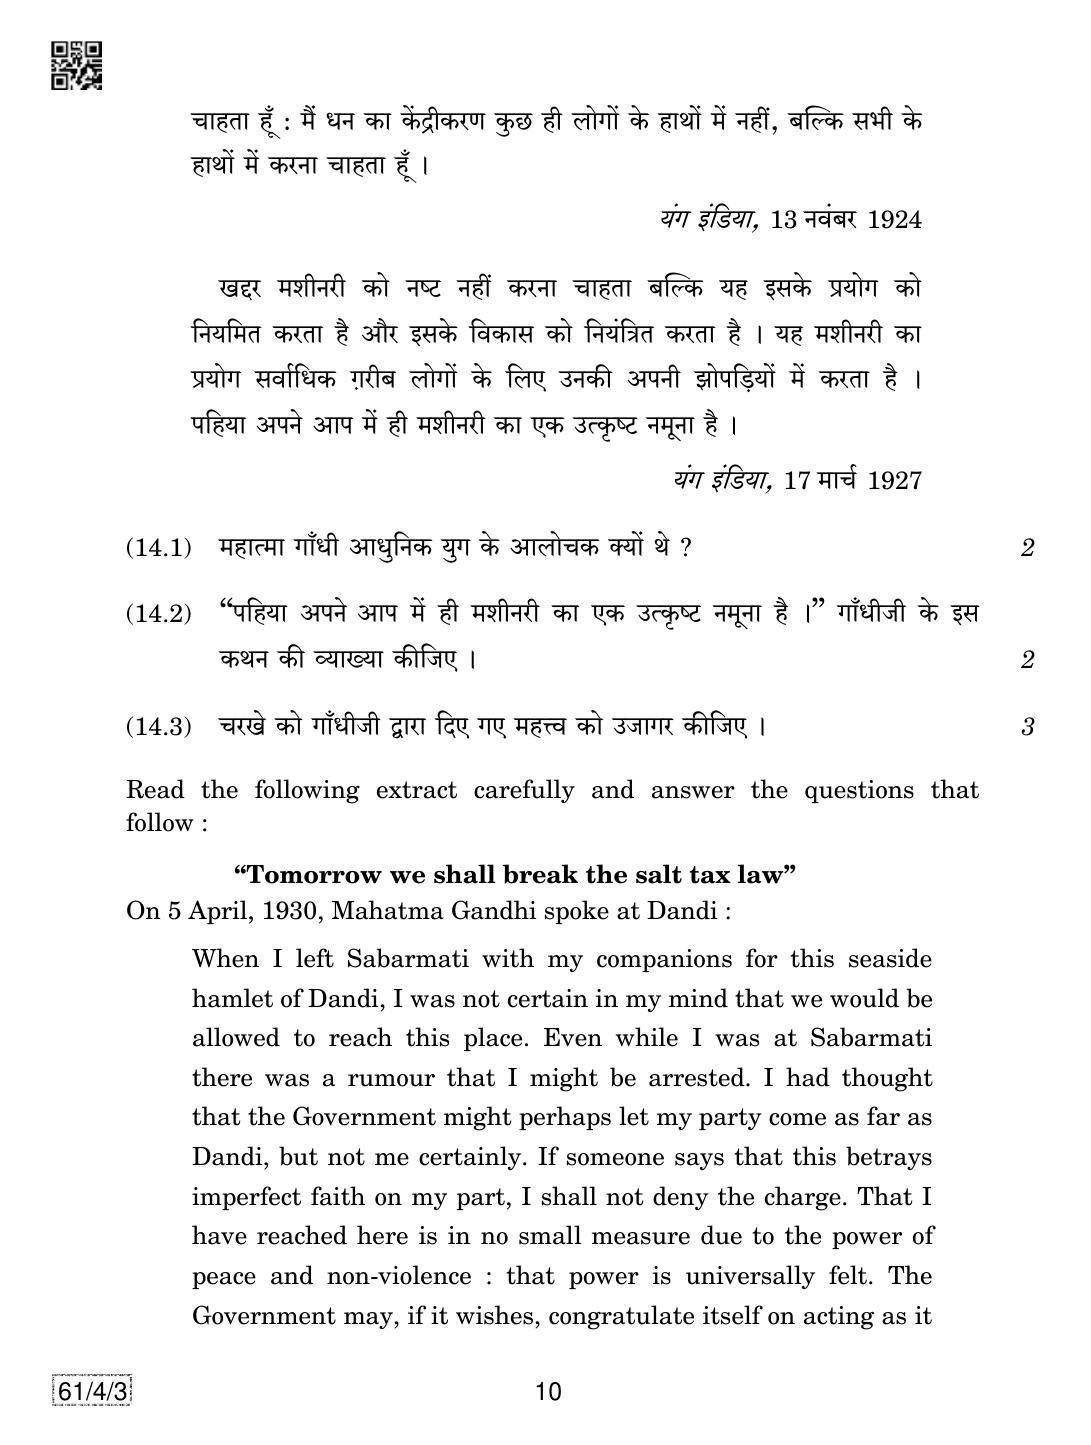 CBSE Class 12 61-4-3 History 2019 Question Paper - Page 10